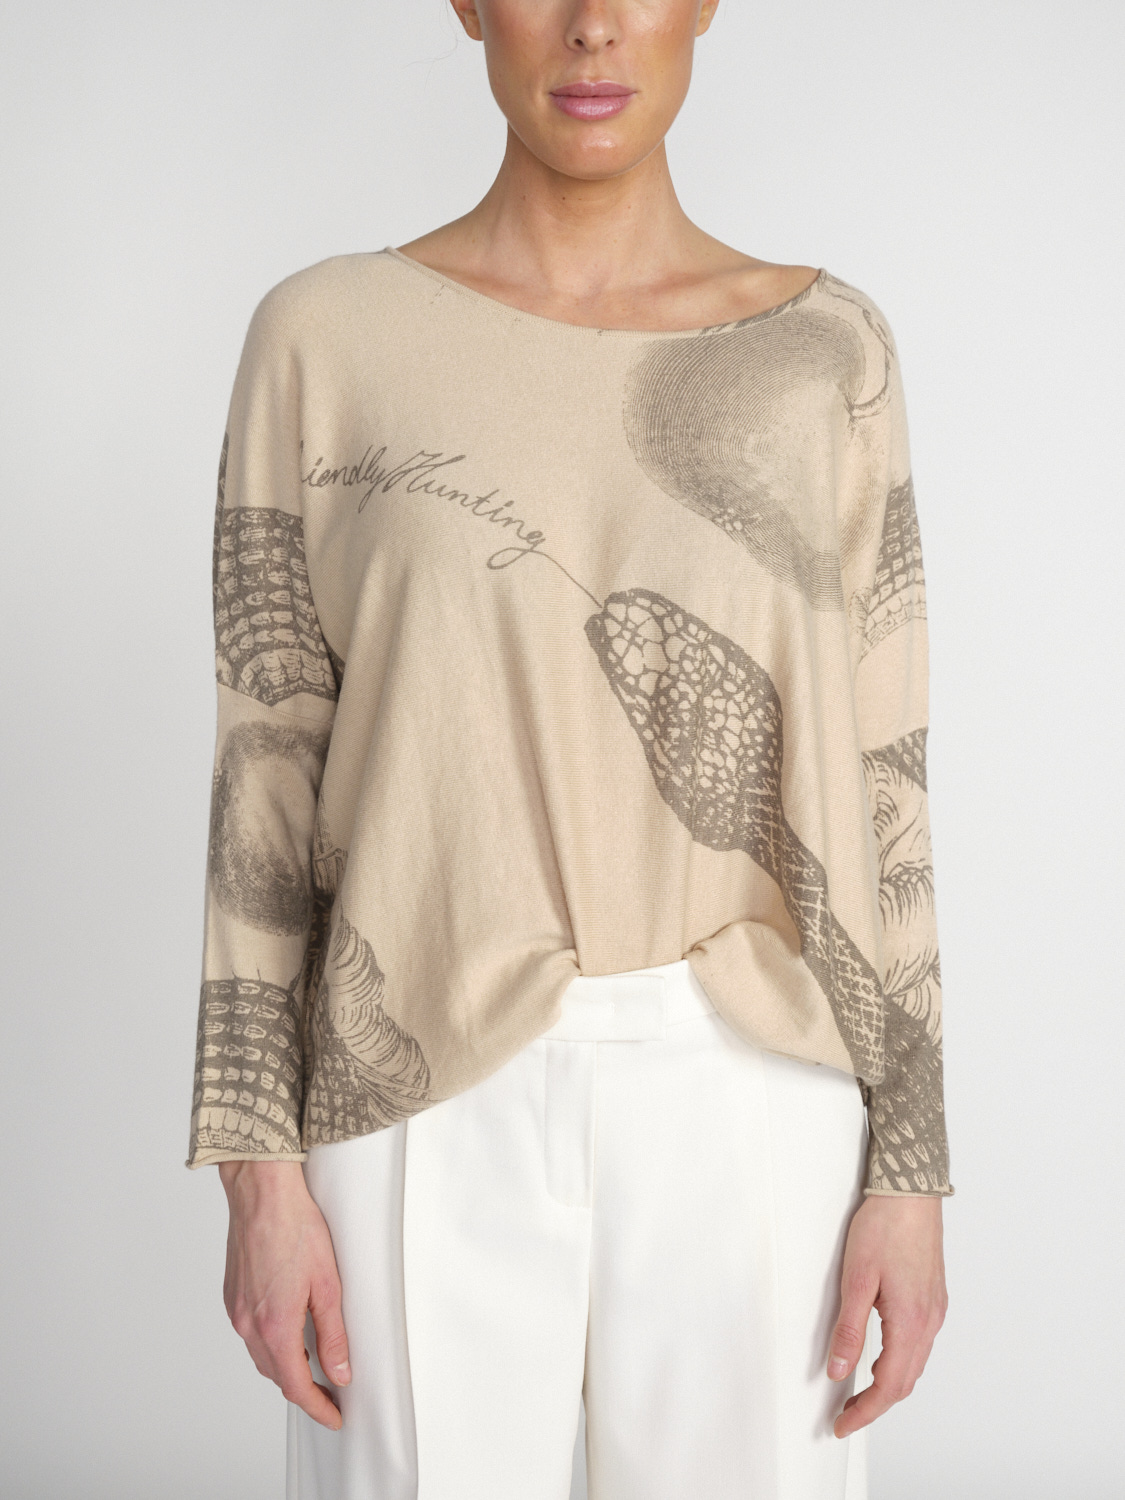 friendly hunting Imara Brighton - Lightweight sweater made from a cotton-cashmere blend  beige S